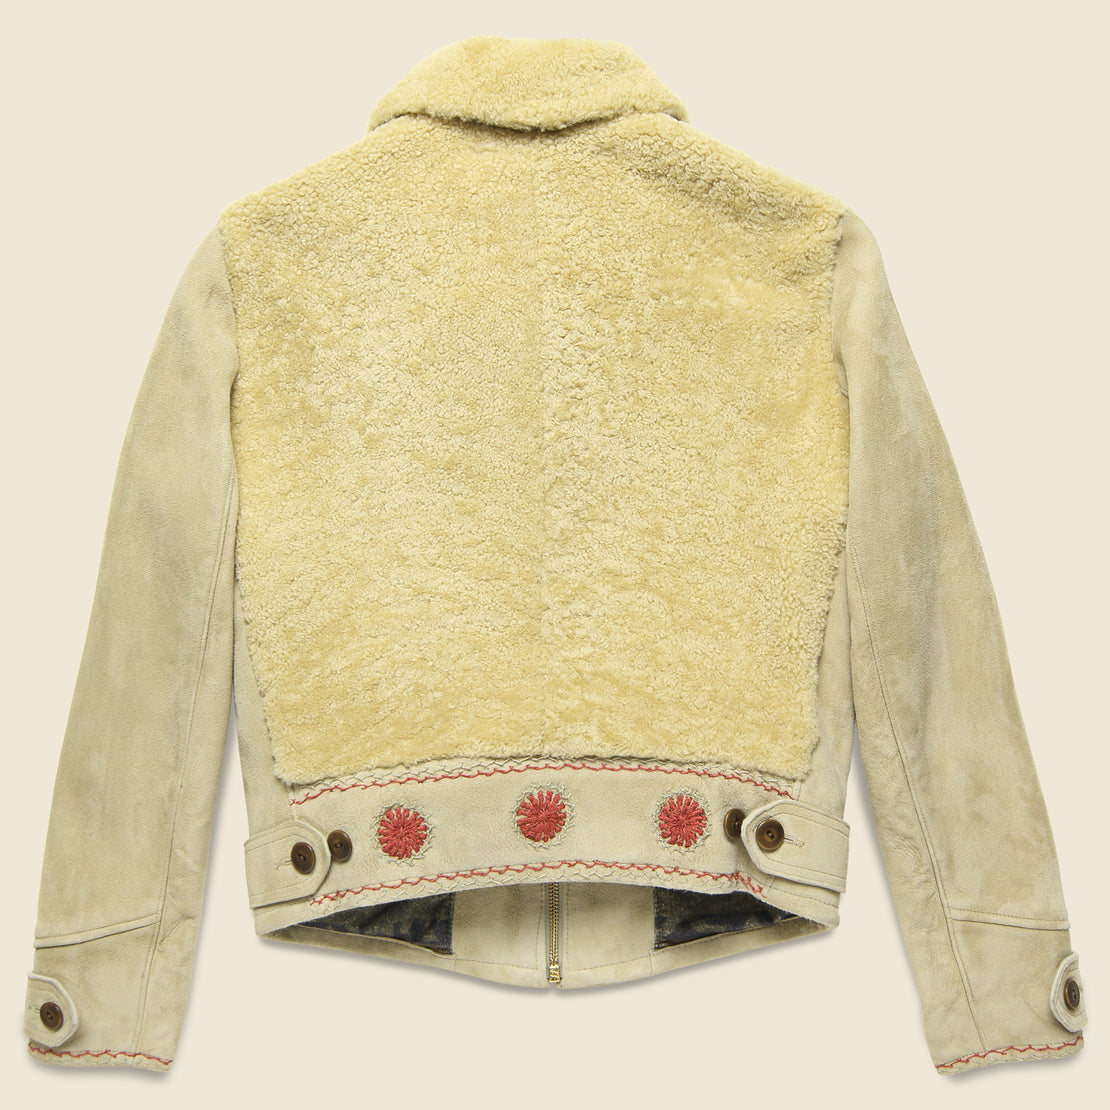 Williams Shearling Embroidered Suede Jacket - Cream - RRL - STAG Provisions - W - Outerwear - Coat/Jacket